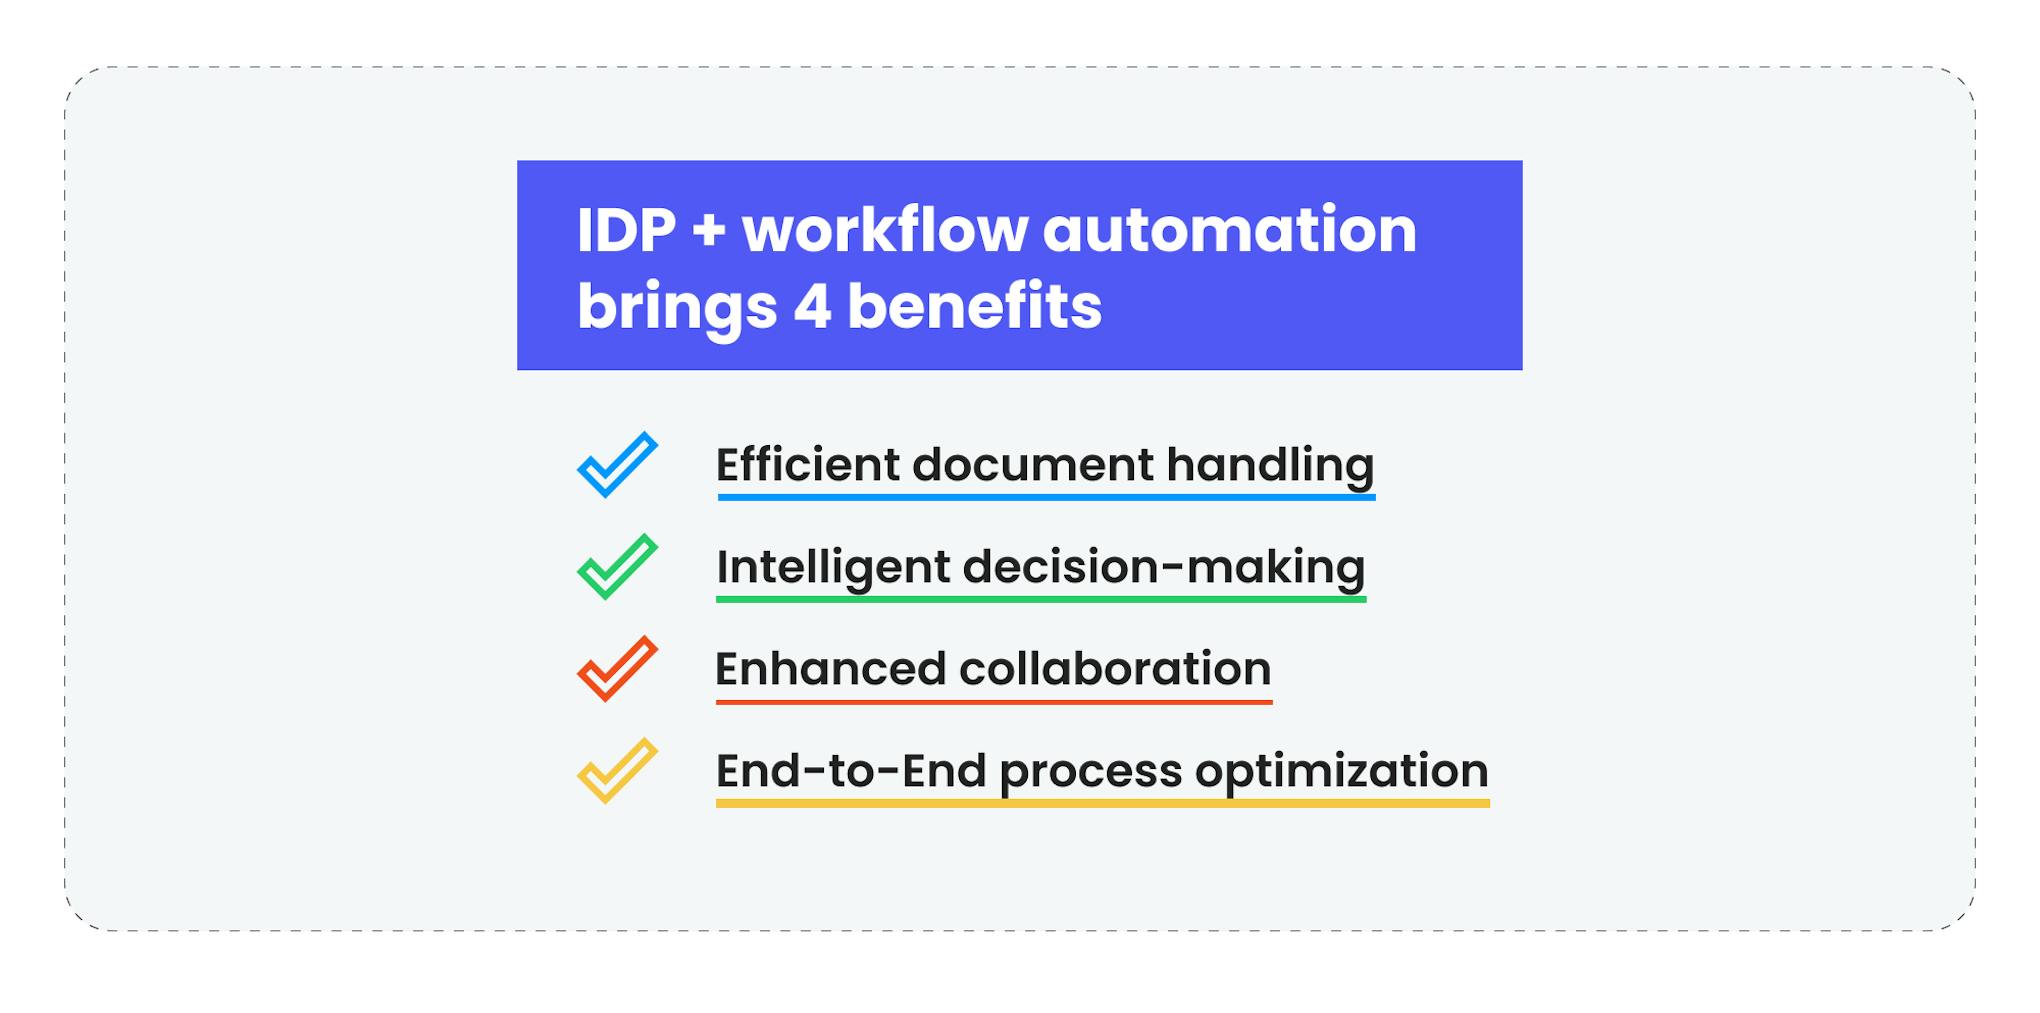 The relationship between IDP and workflow automation